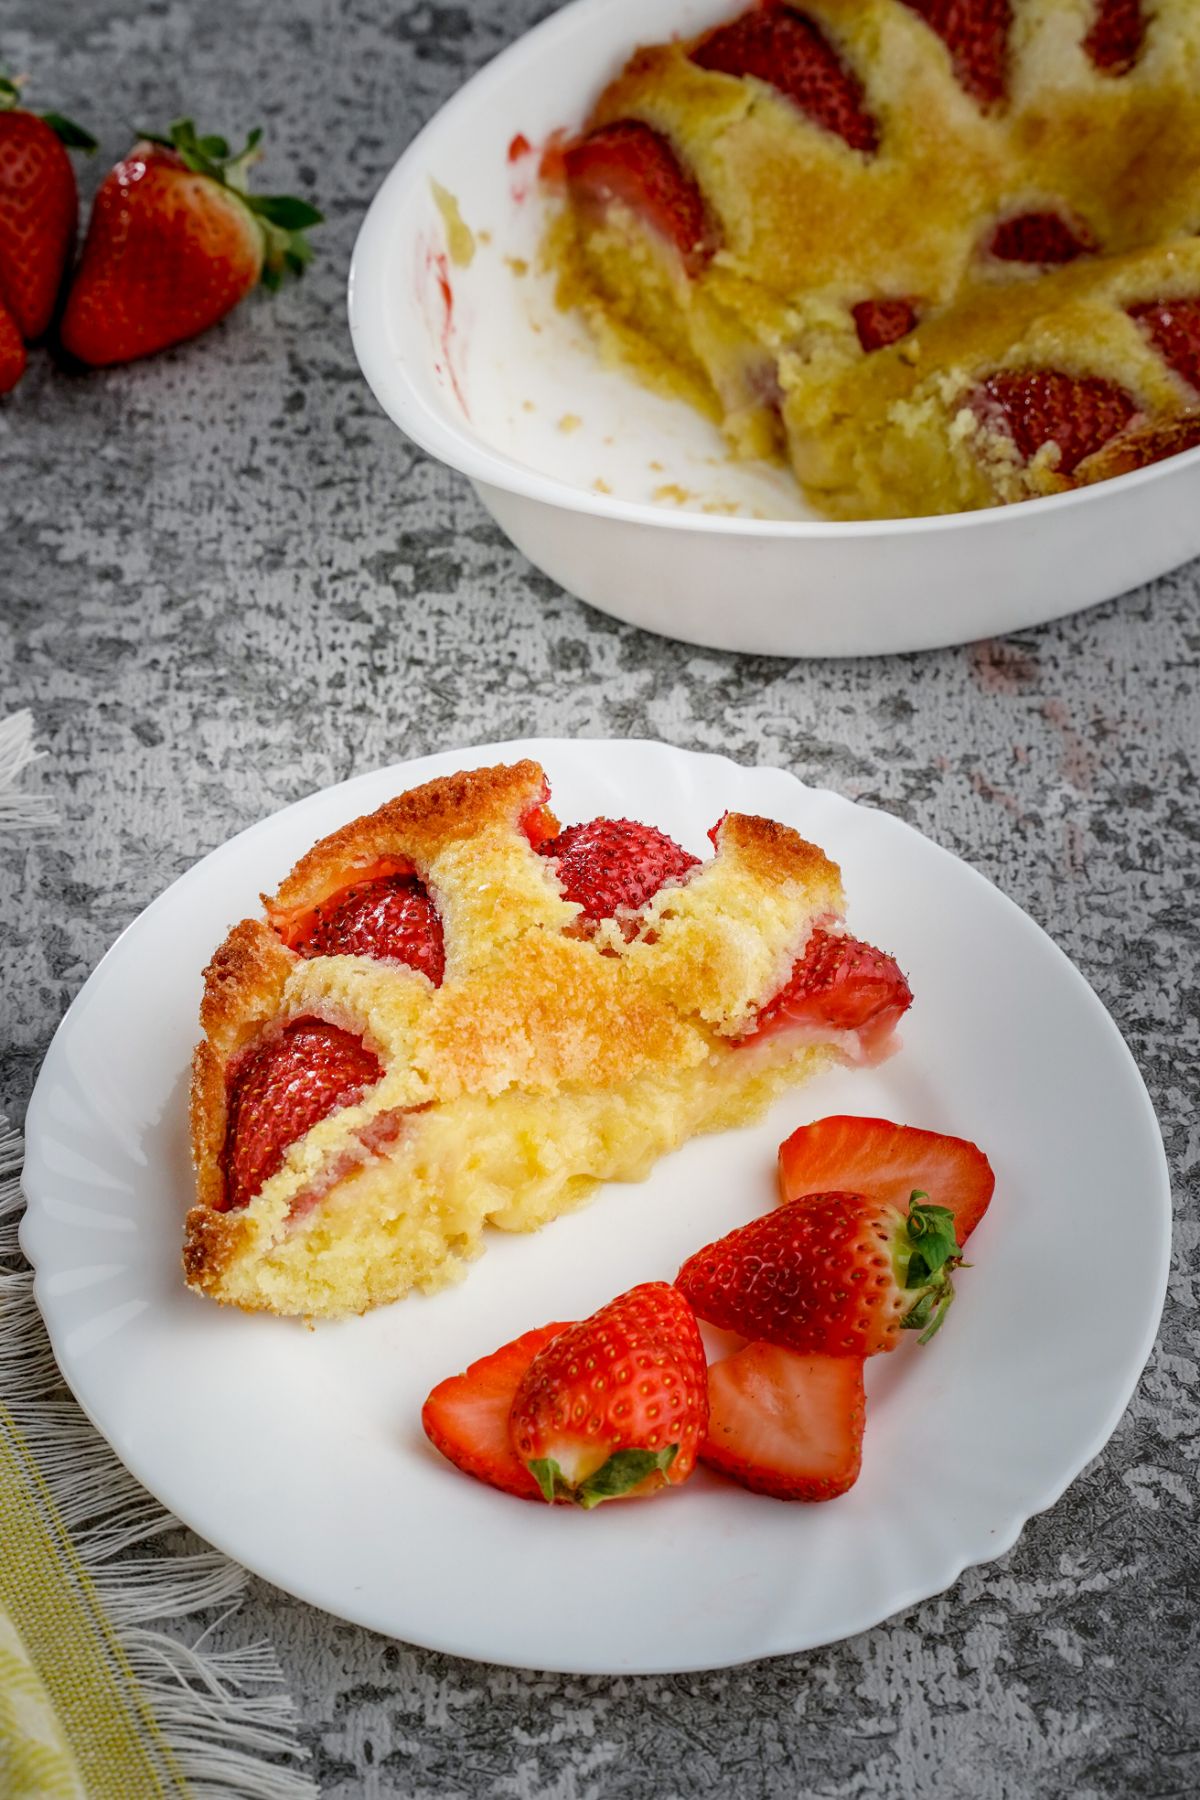 Piece of fresh strawberry cake on a white plate with sliced strawberries.